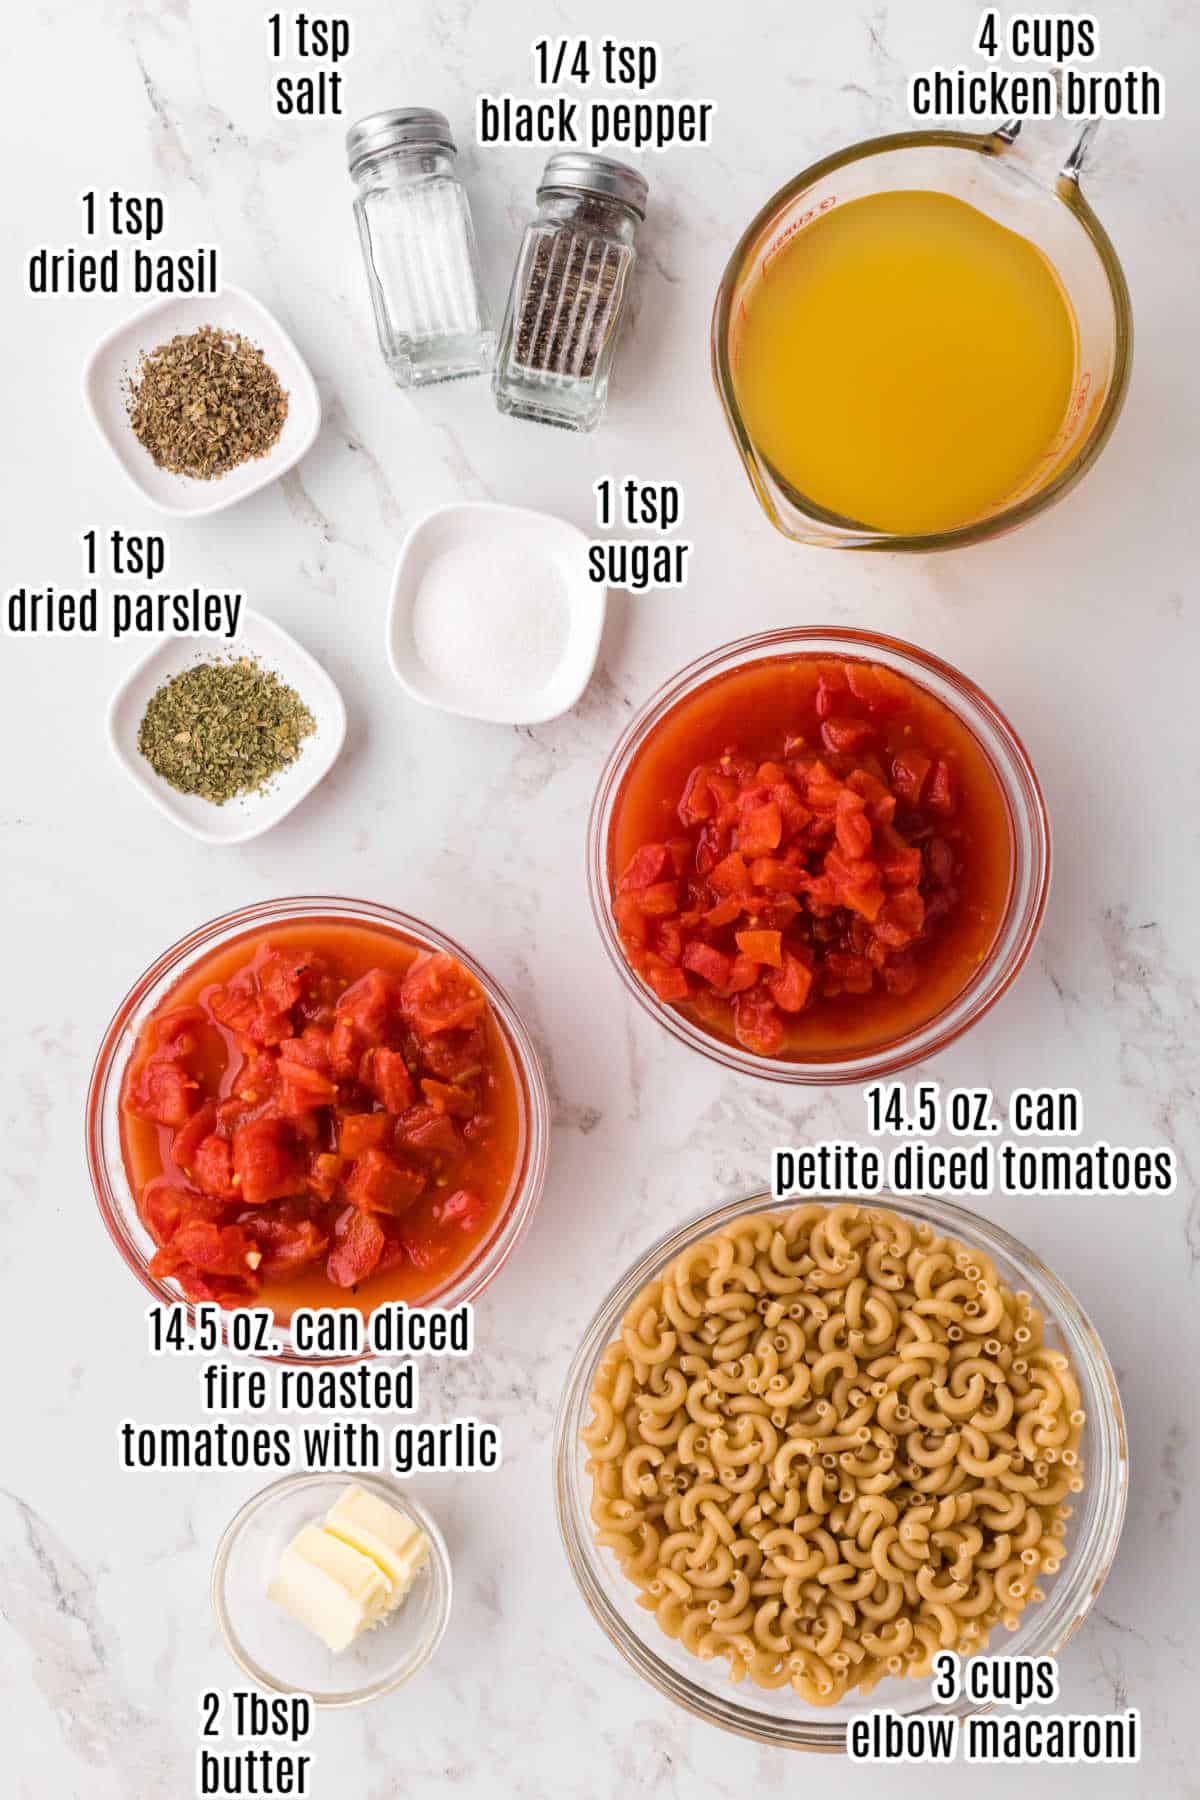 Labeled ingredients for macaroni and tomatoes recipe.